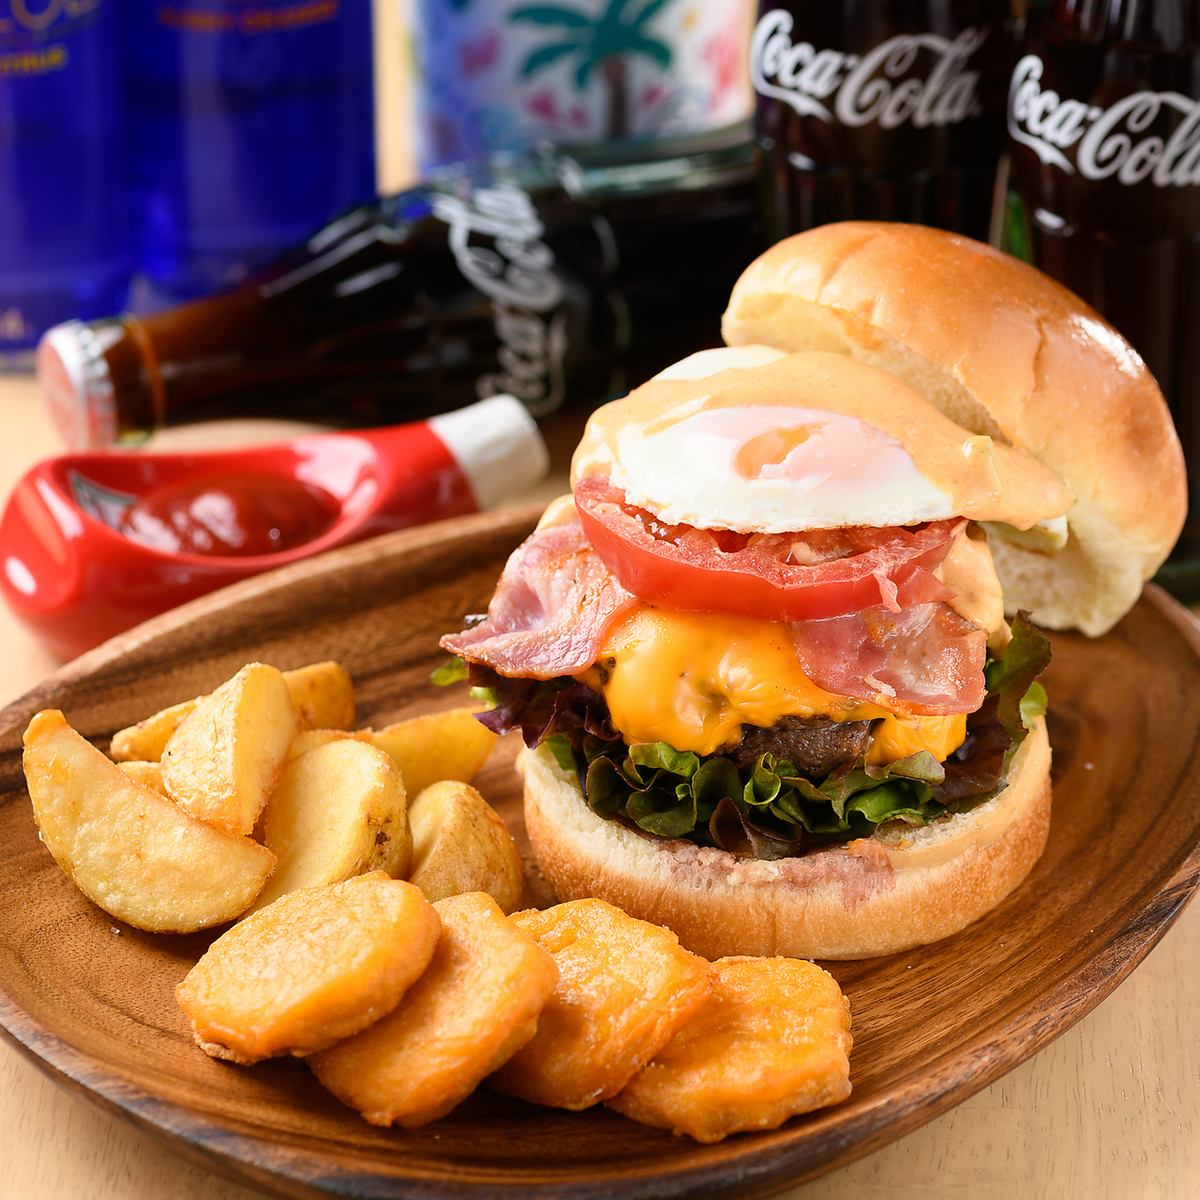 There is a student discount♪ You can enjoy a hearty hamburger!